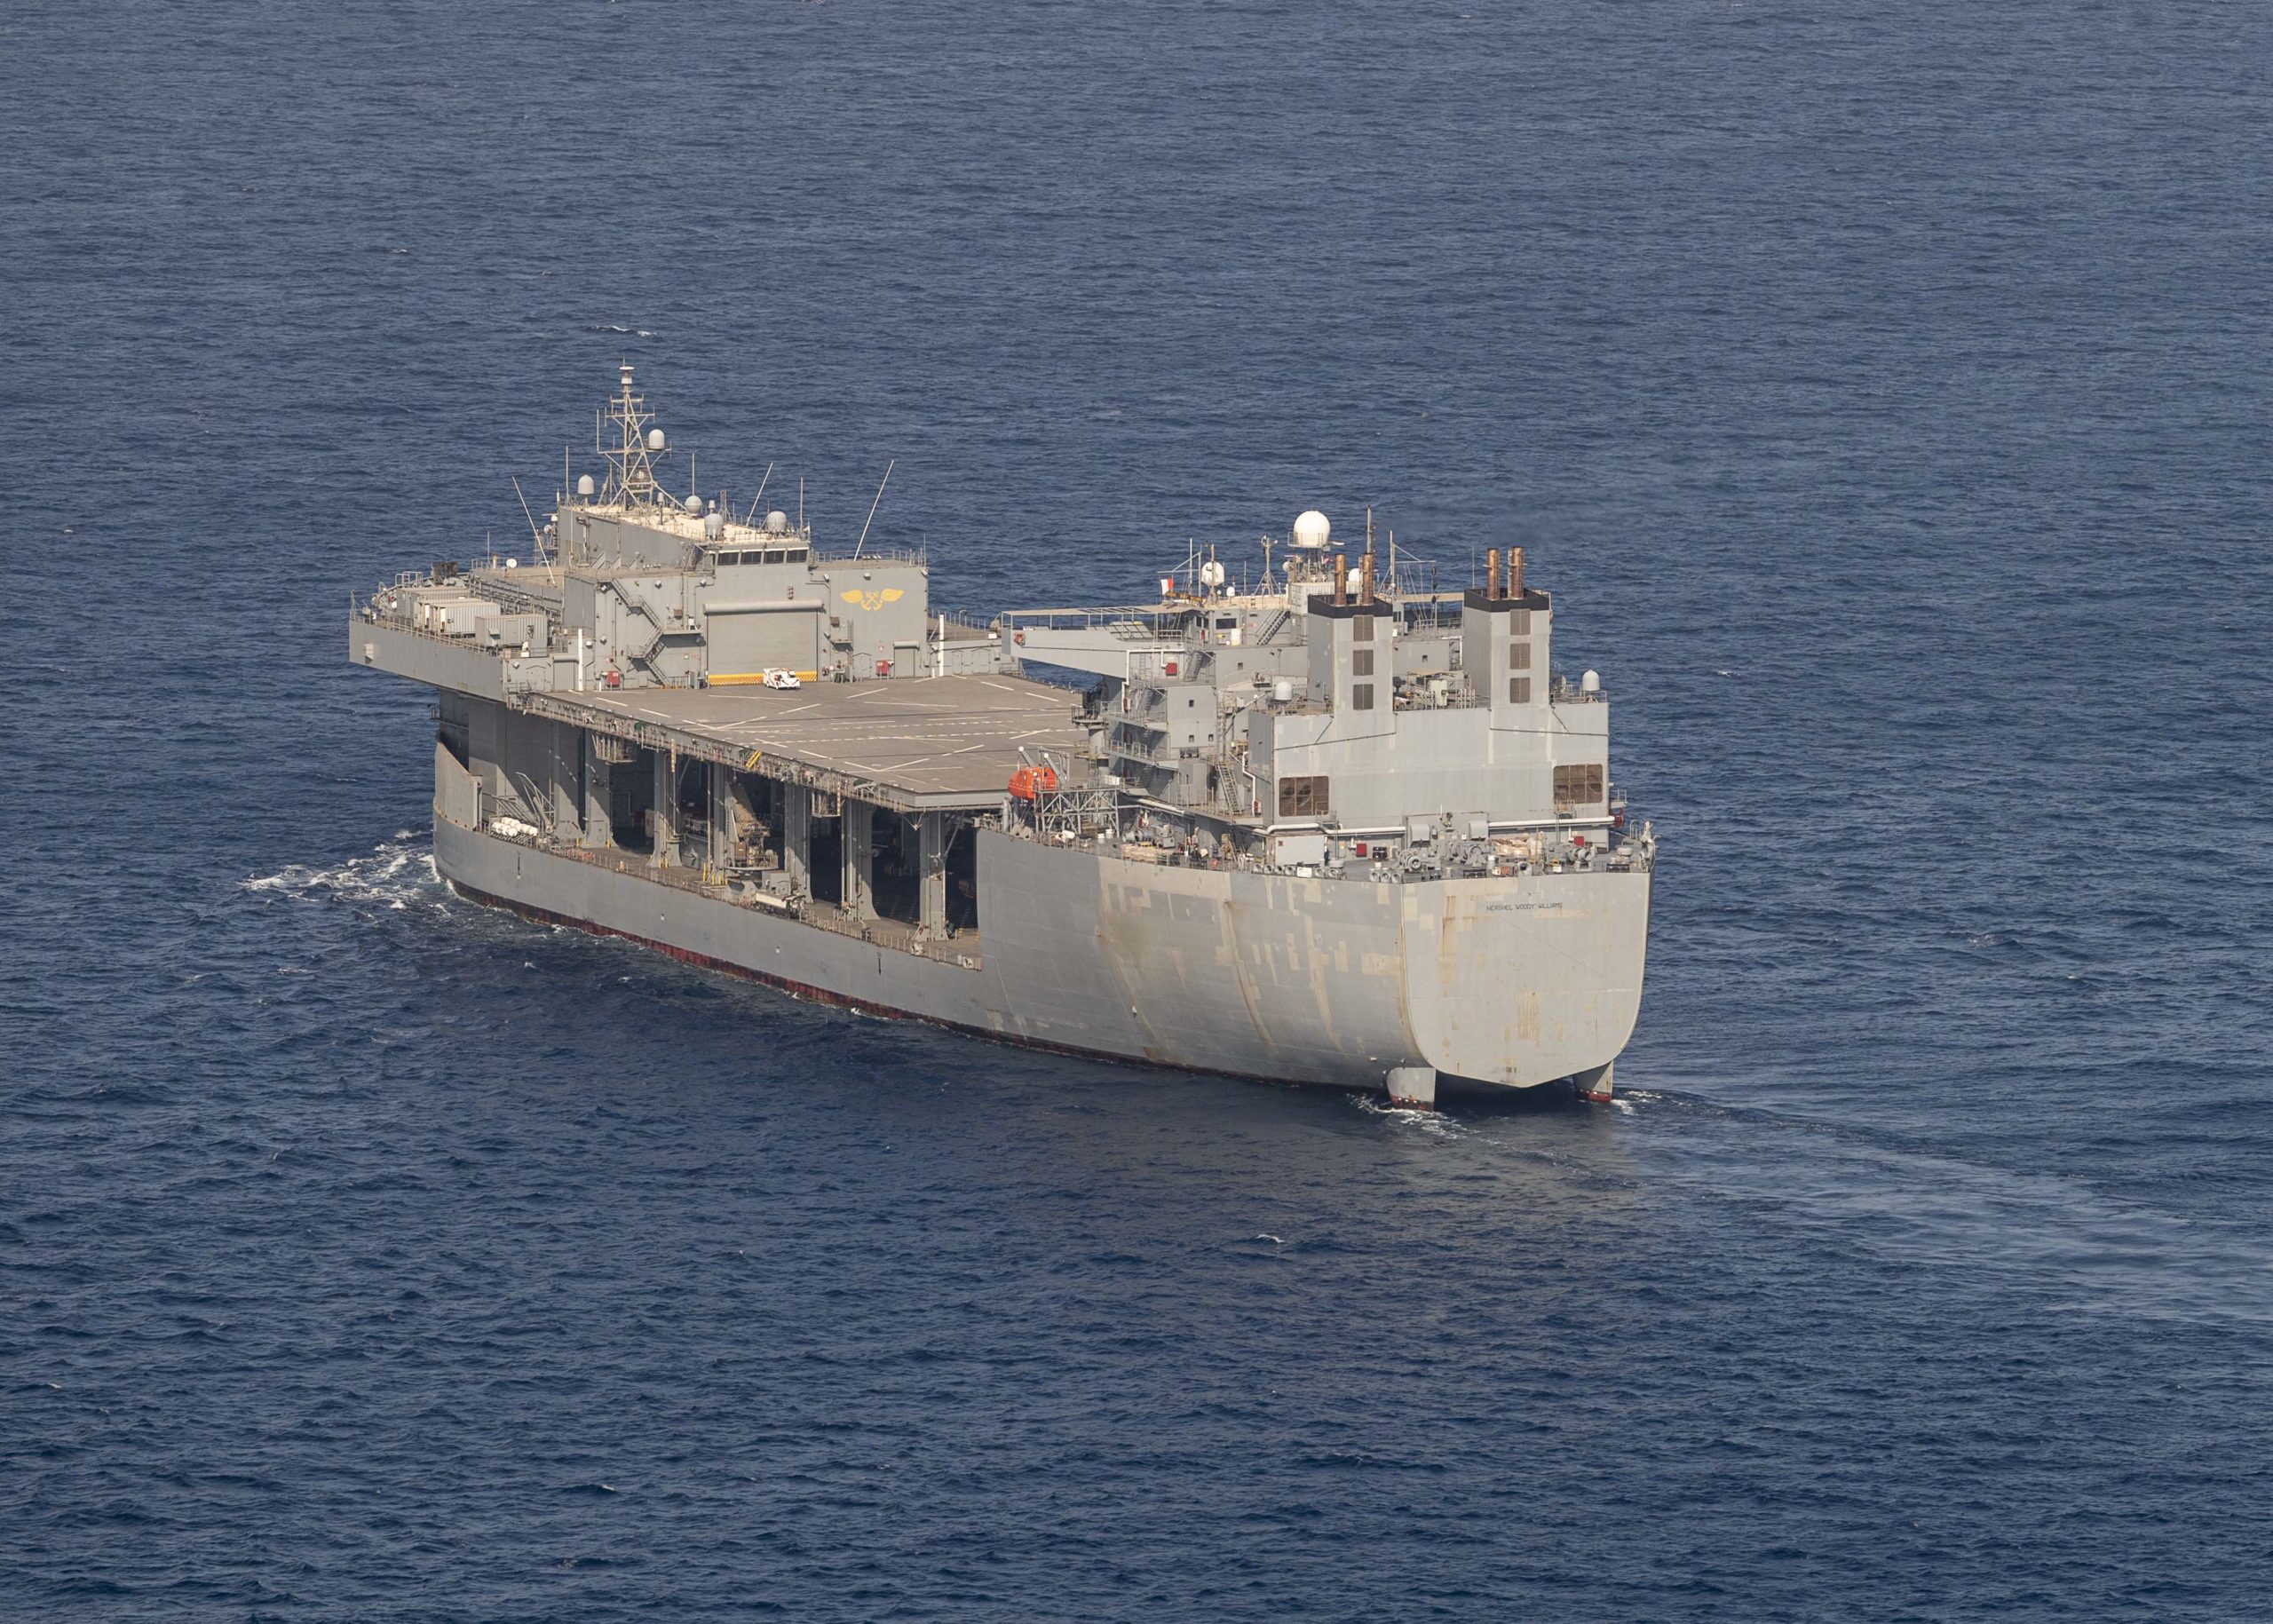 USS Hershel “Woody” Williams (ESB 4) arrives in Cape Town, South Africa